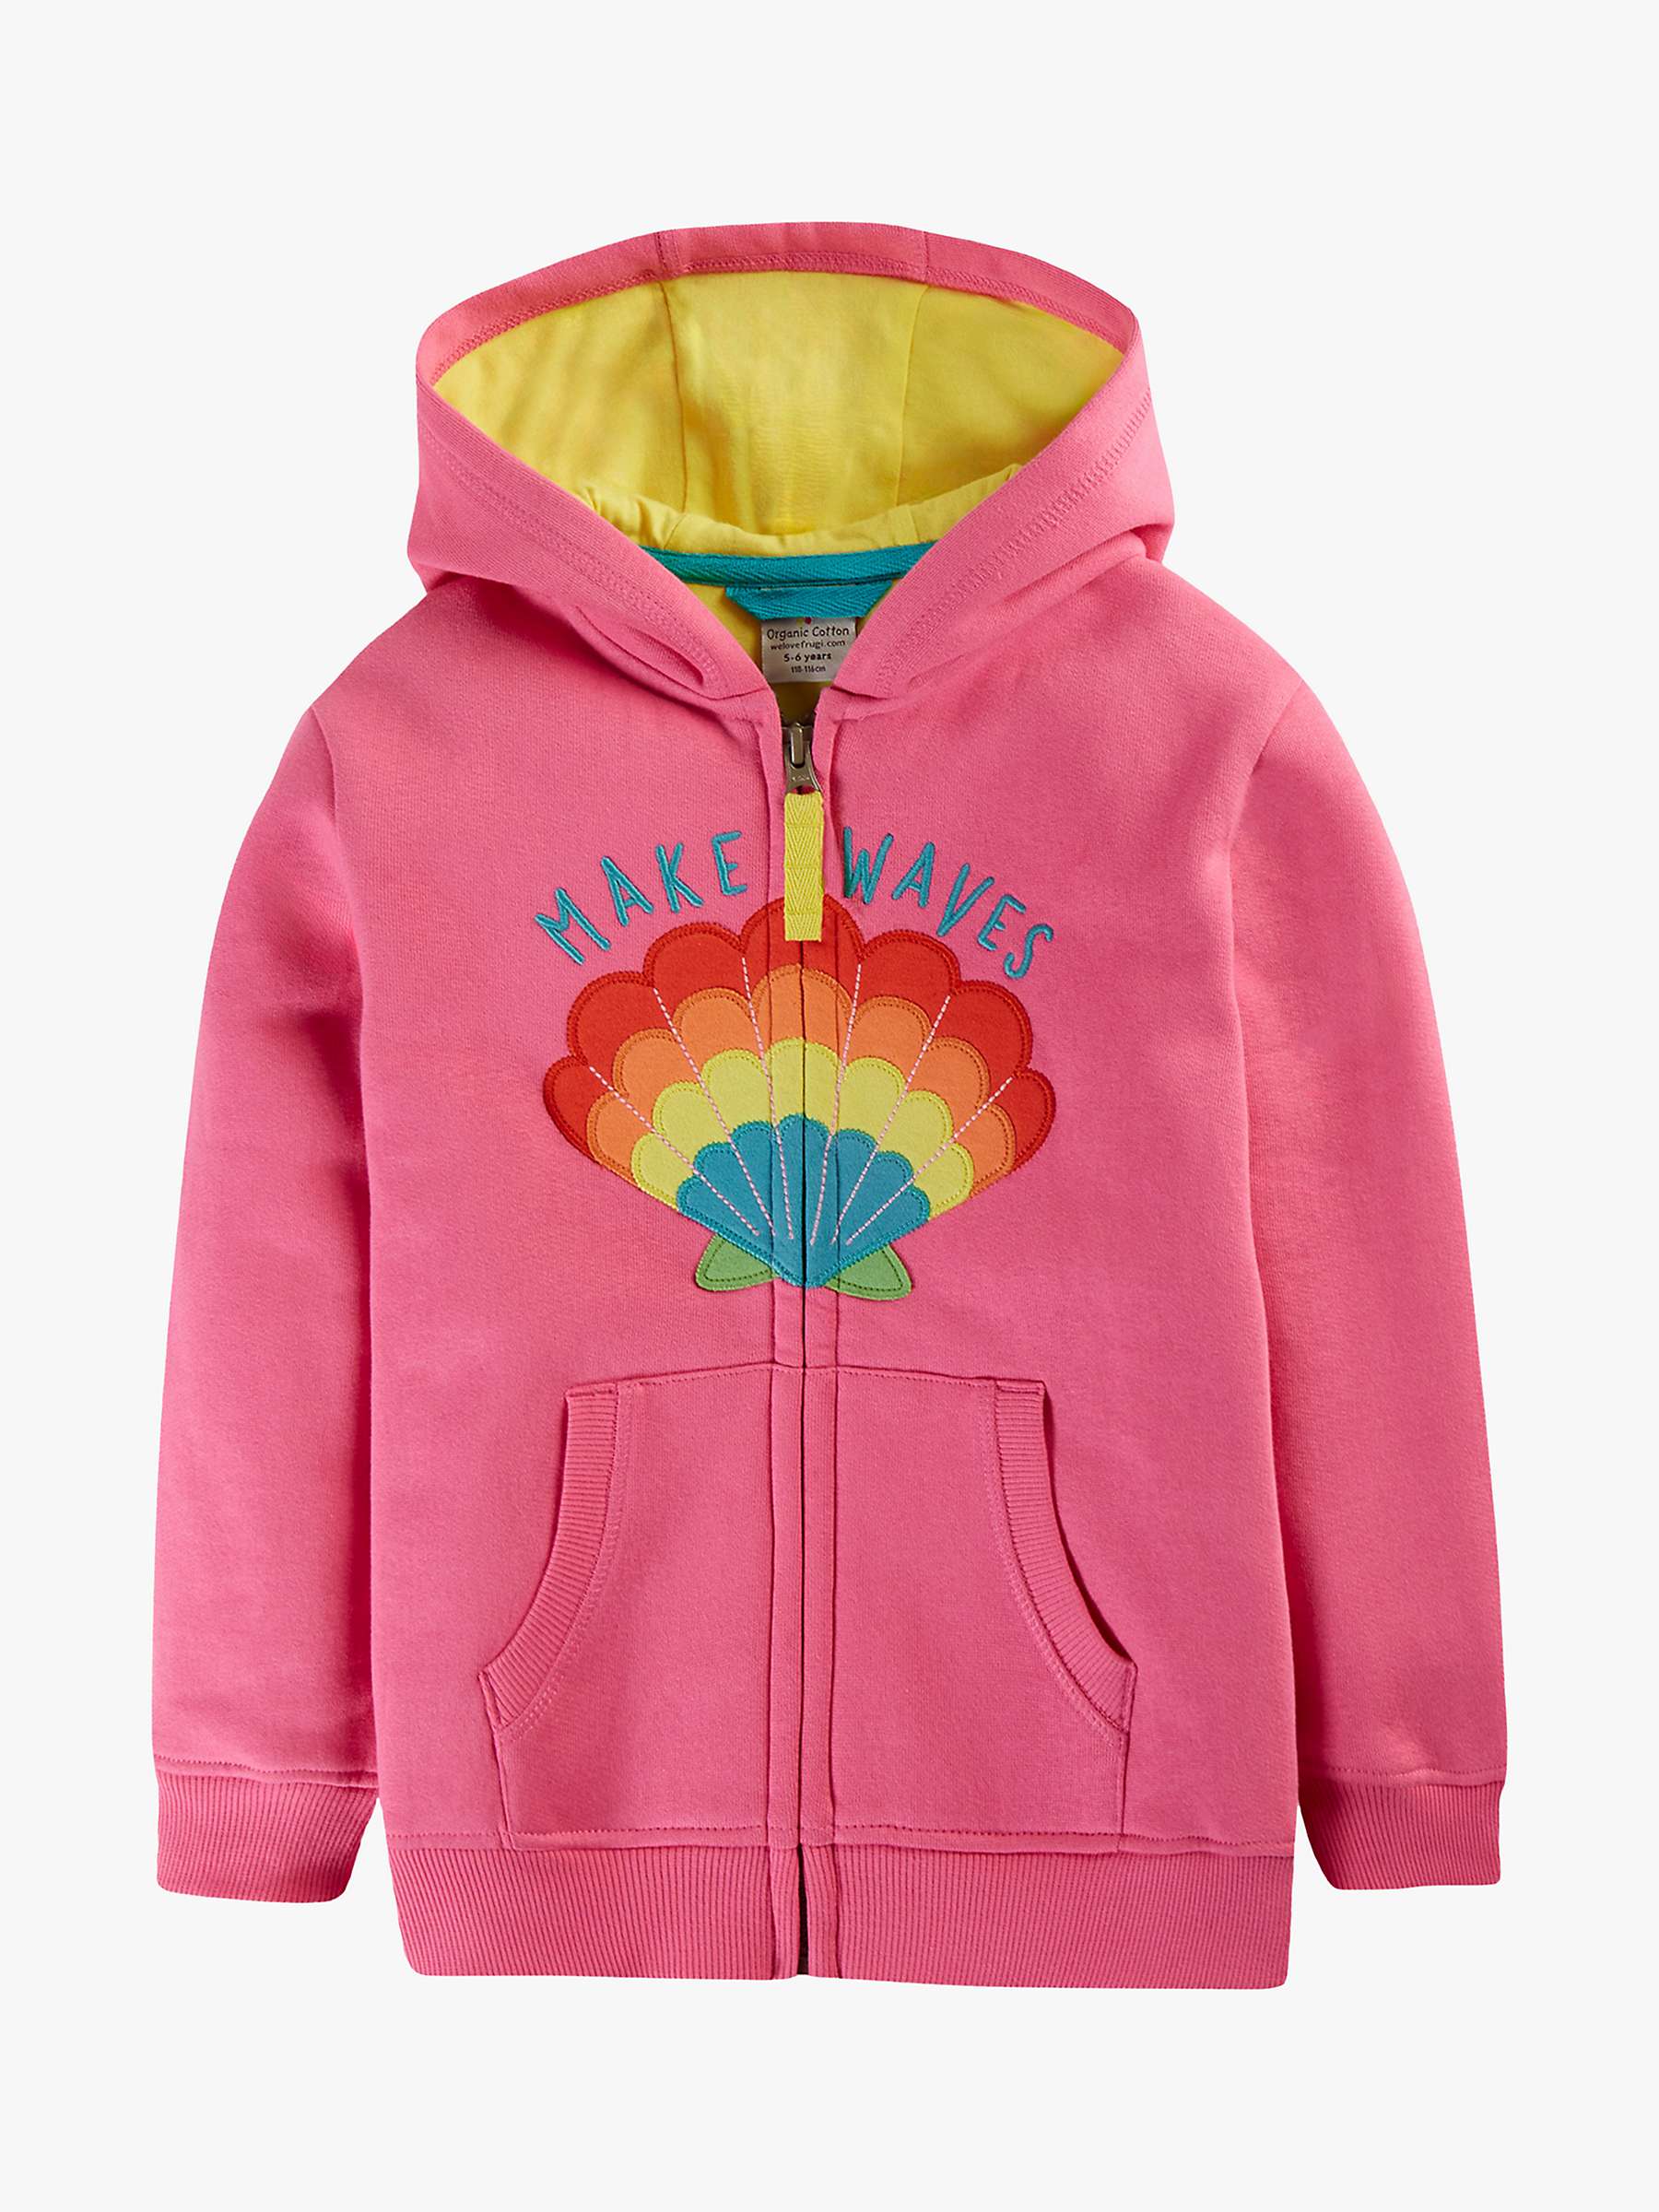 Buy Frugi Baby Organic Cotton Little Switch Carbis Hoodie Online at johnlewis.com